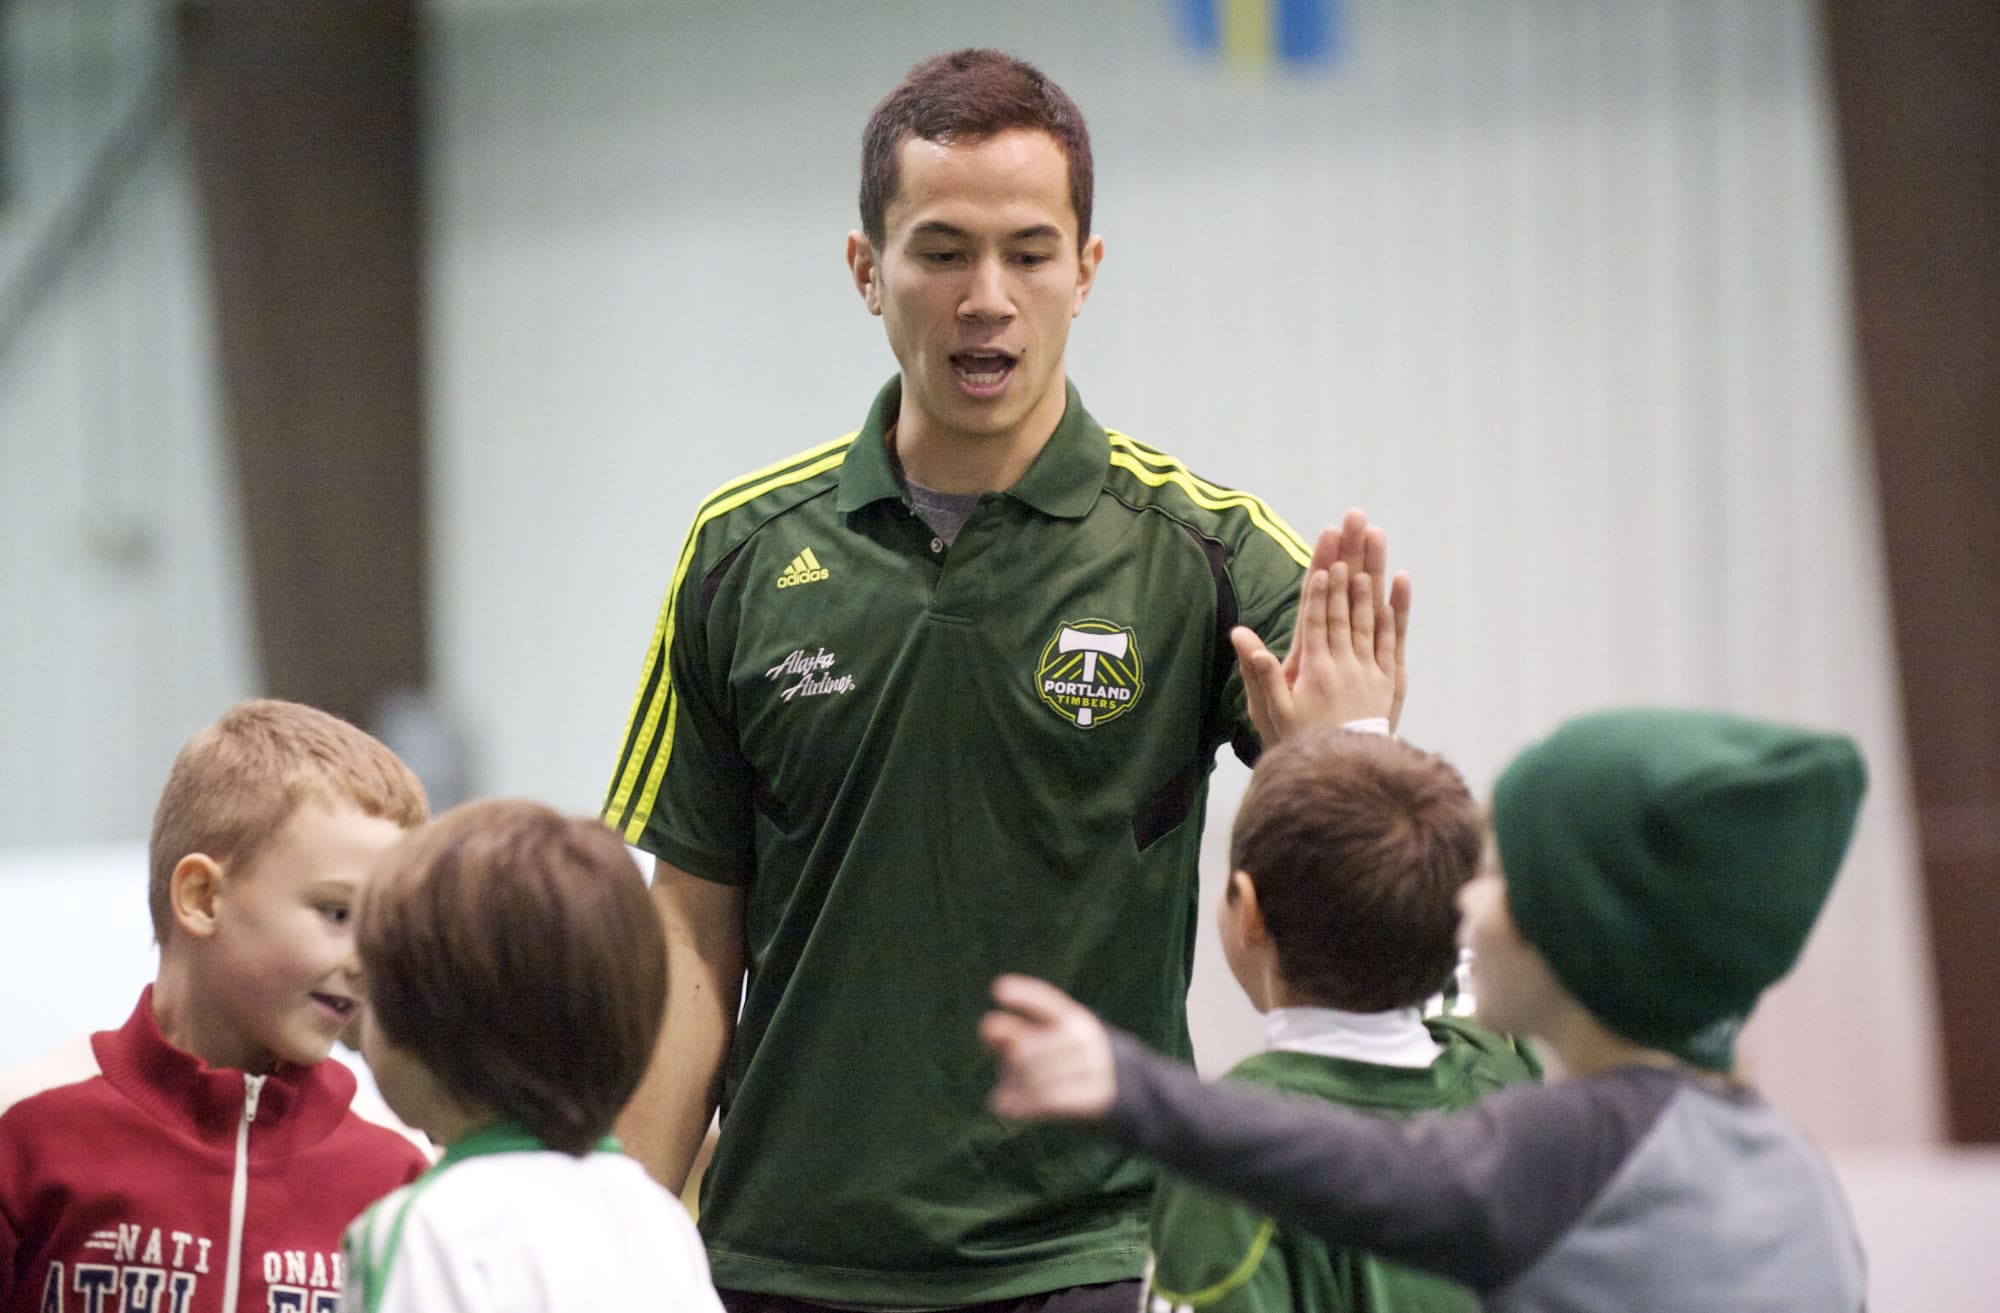 Portland Timbers player Brent Richards attends a youth soccer clinic at the Clark County Indoor Sports Center on Jan.